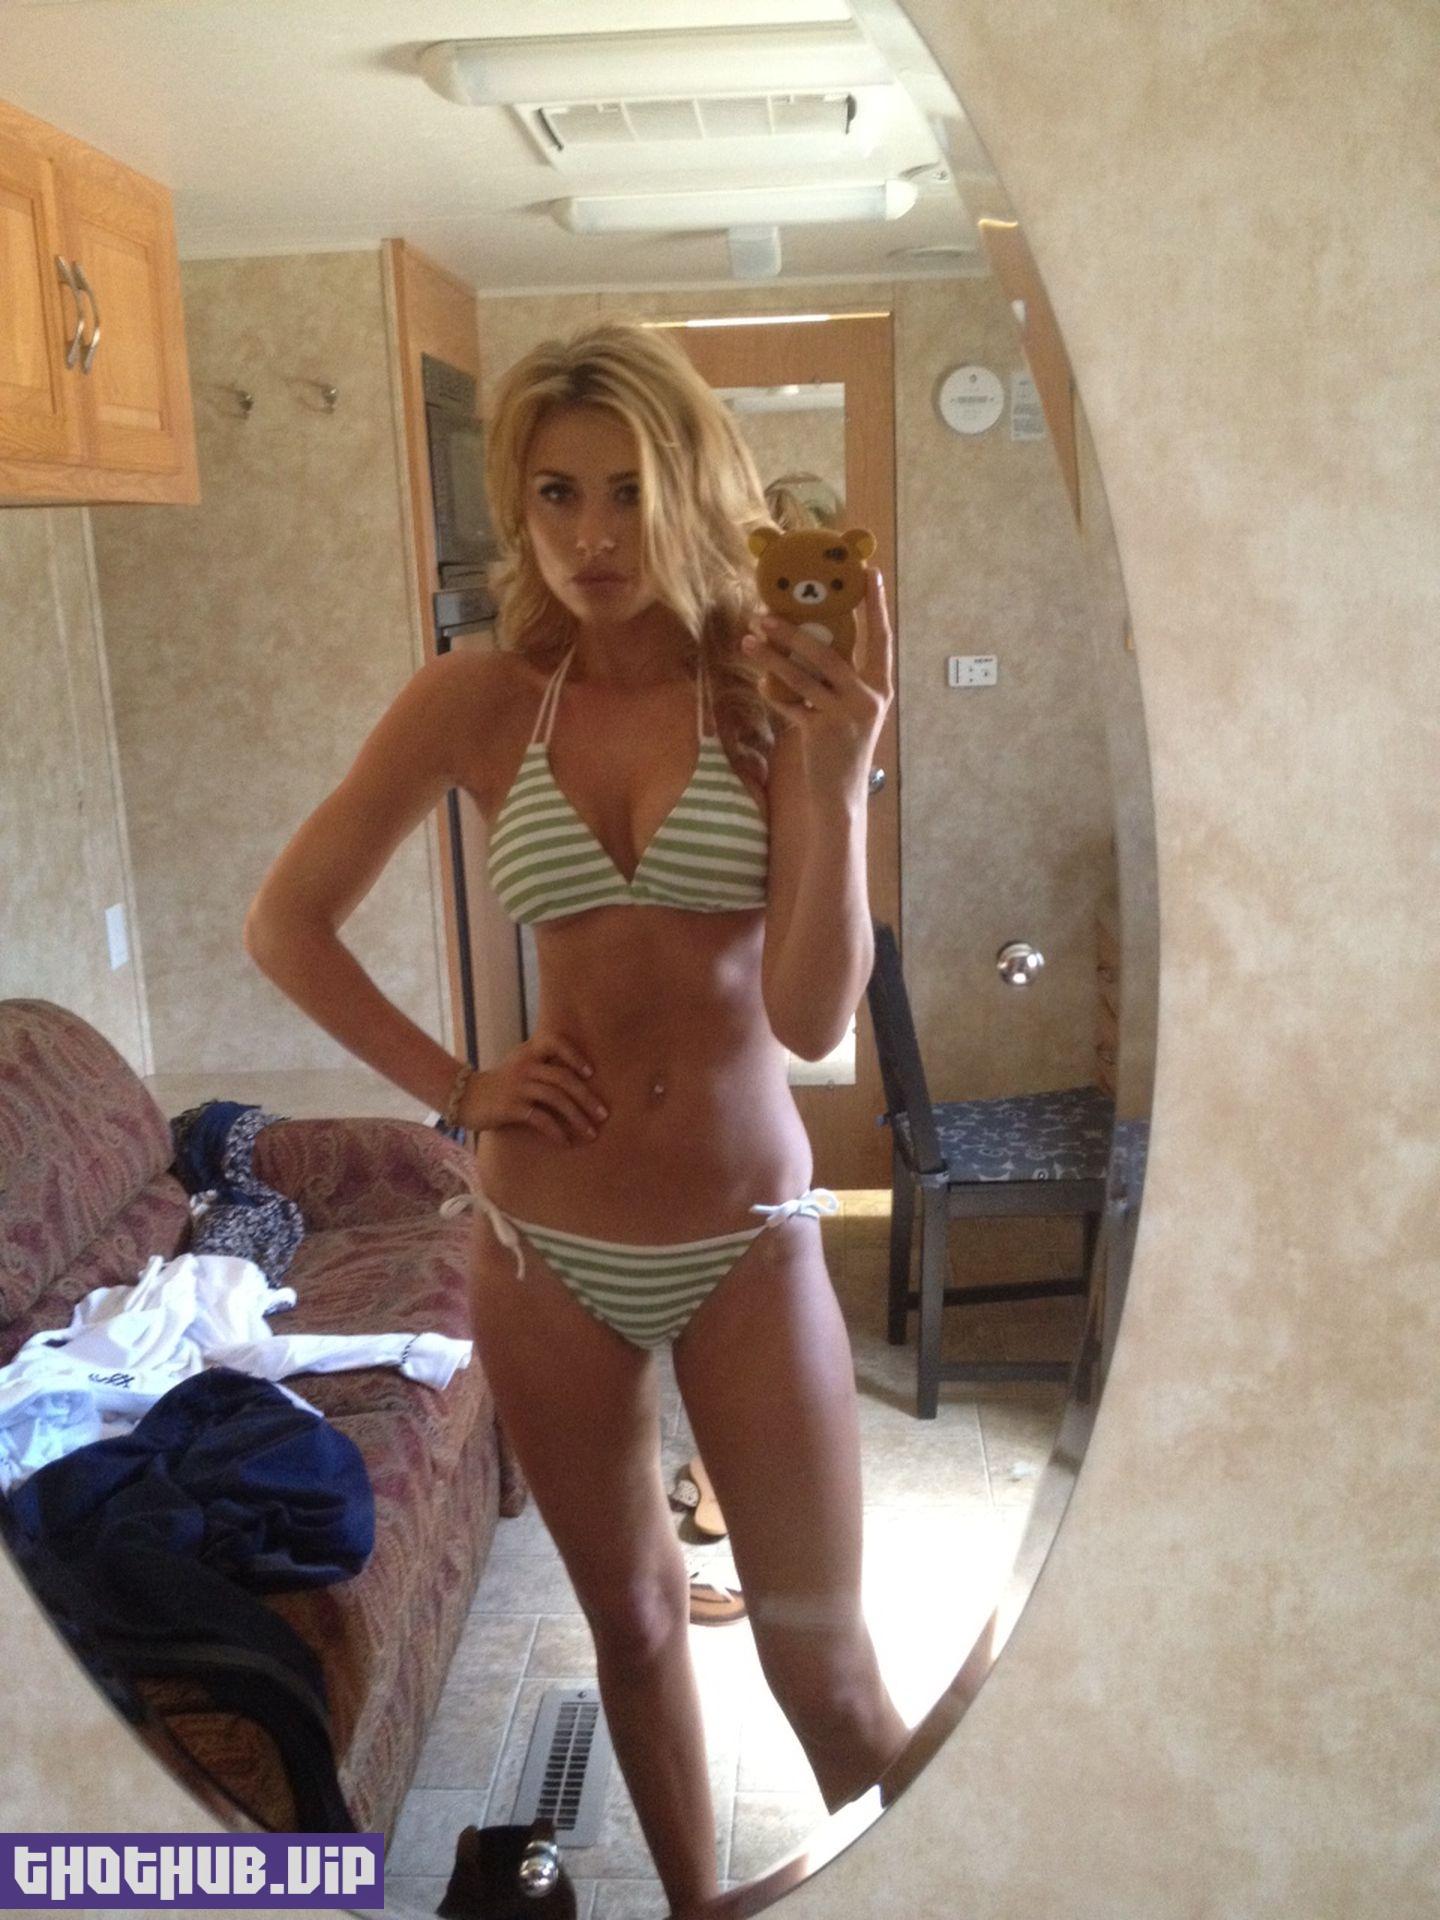 Aly Michalka nude photos leaked The Fappening 2019 from hacked iCloud